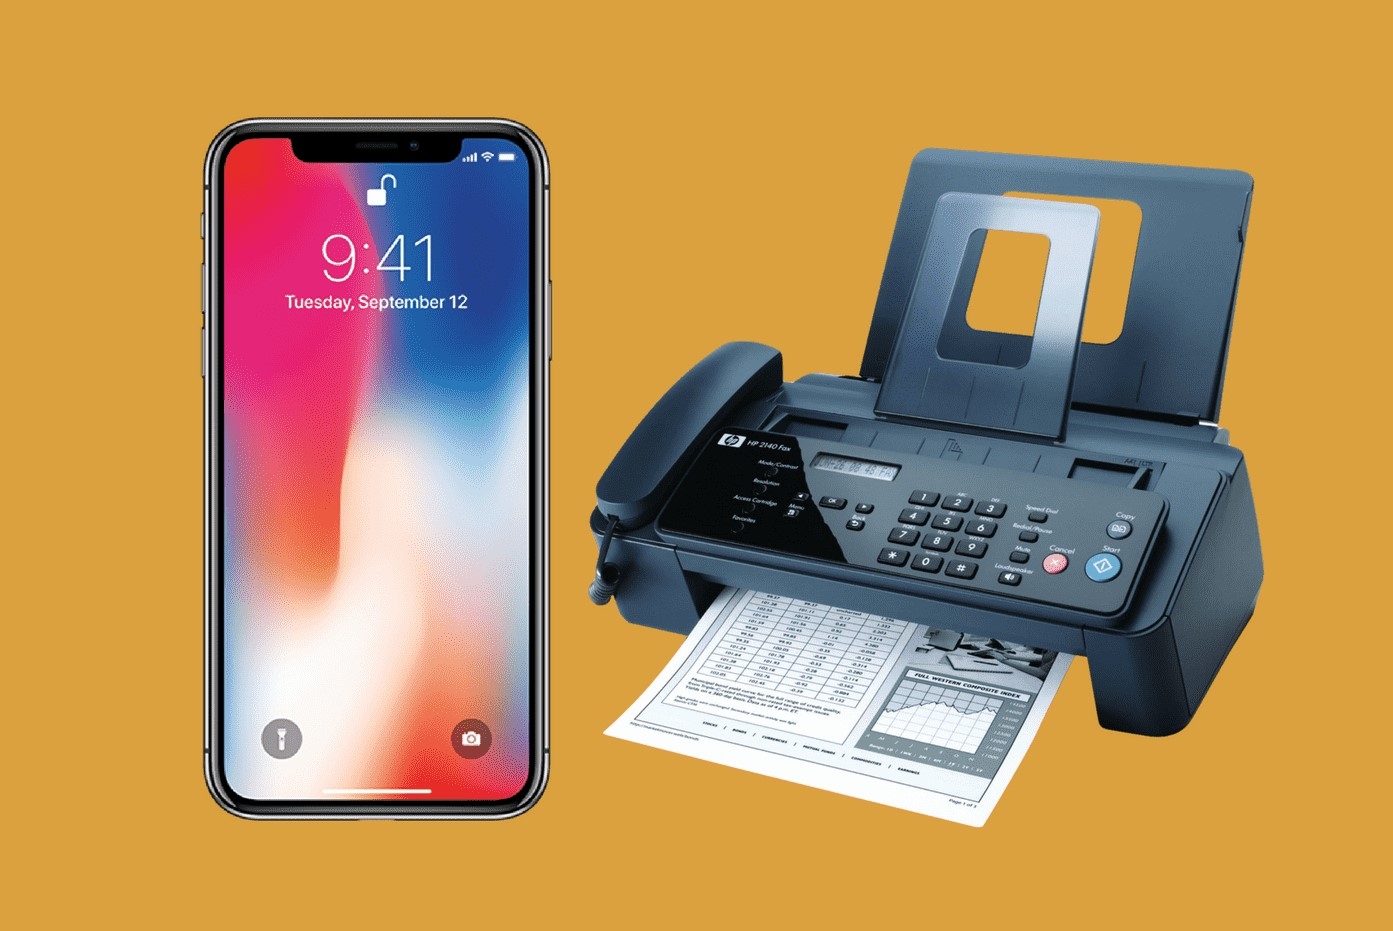 Can I Fax From My iPhone? TechLatest